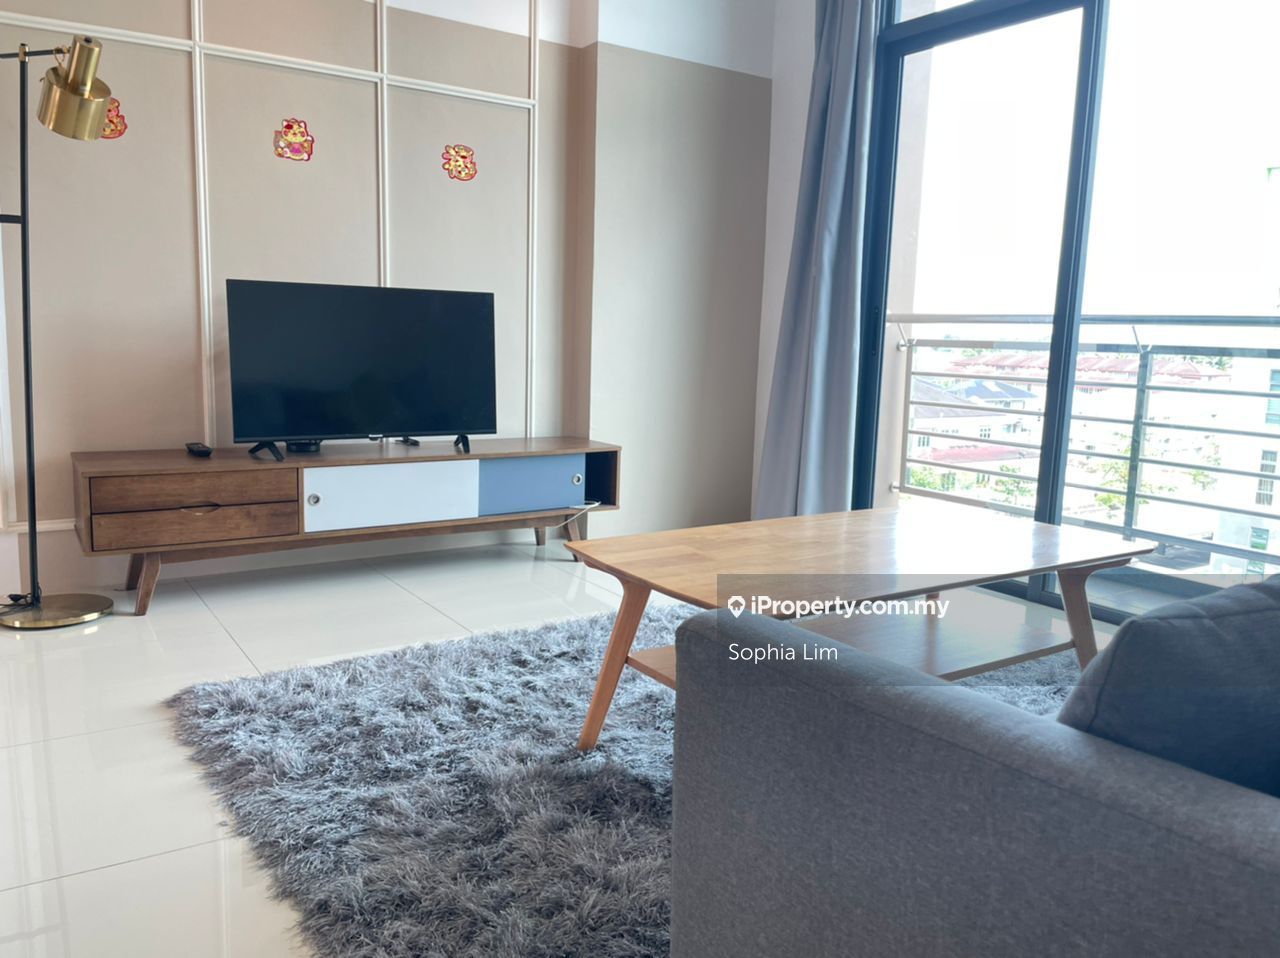 Laticube Apartment 2 bedrooms for sale in Kuching, Sarawak | iProperty